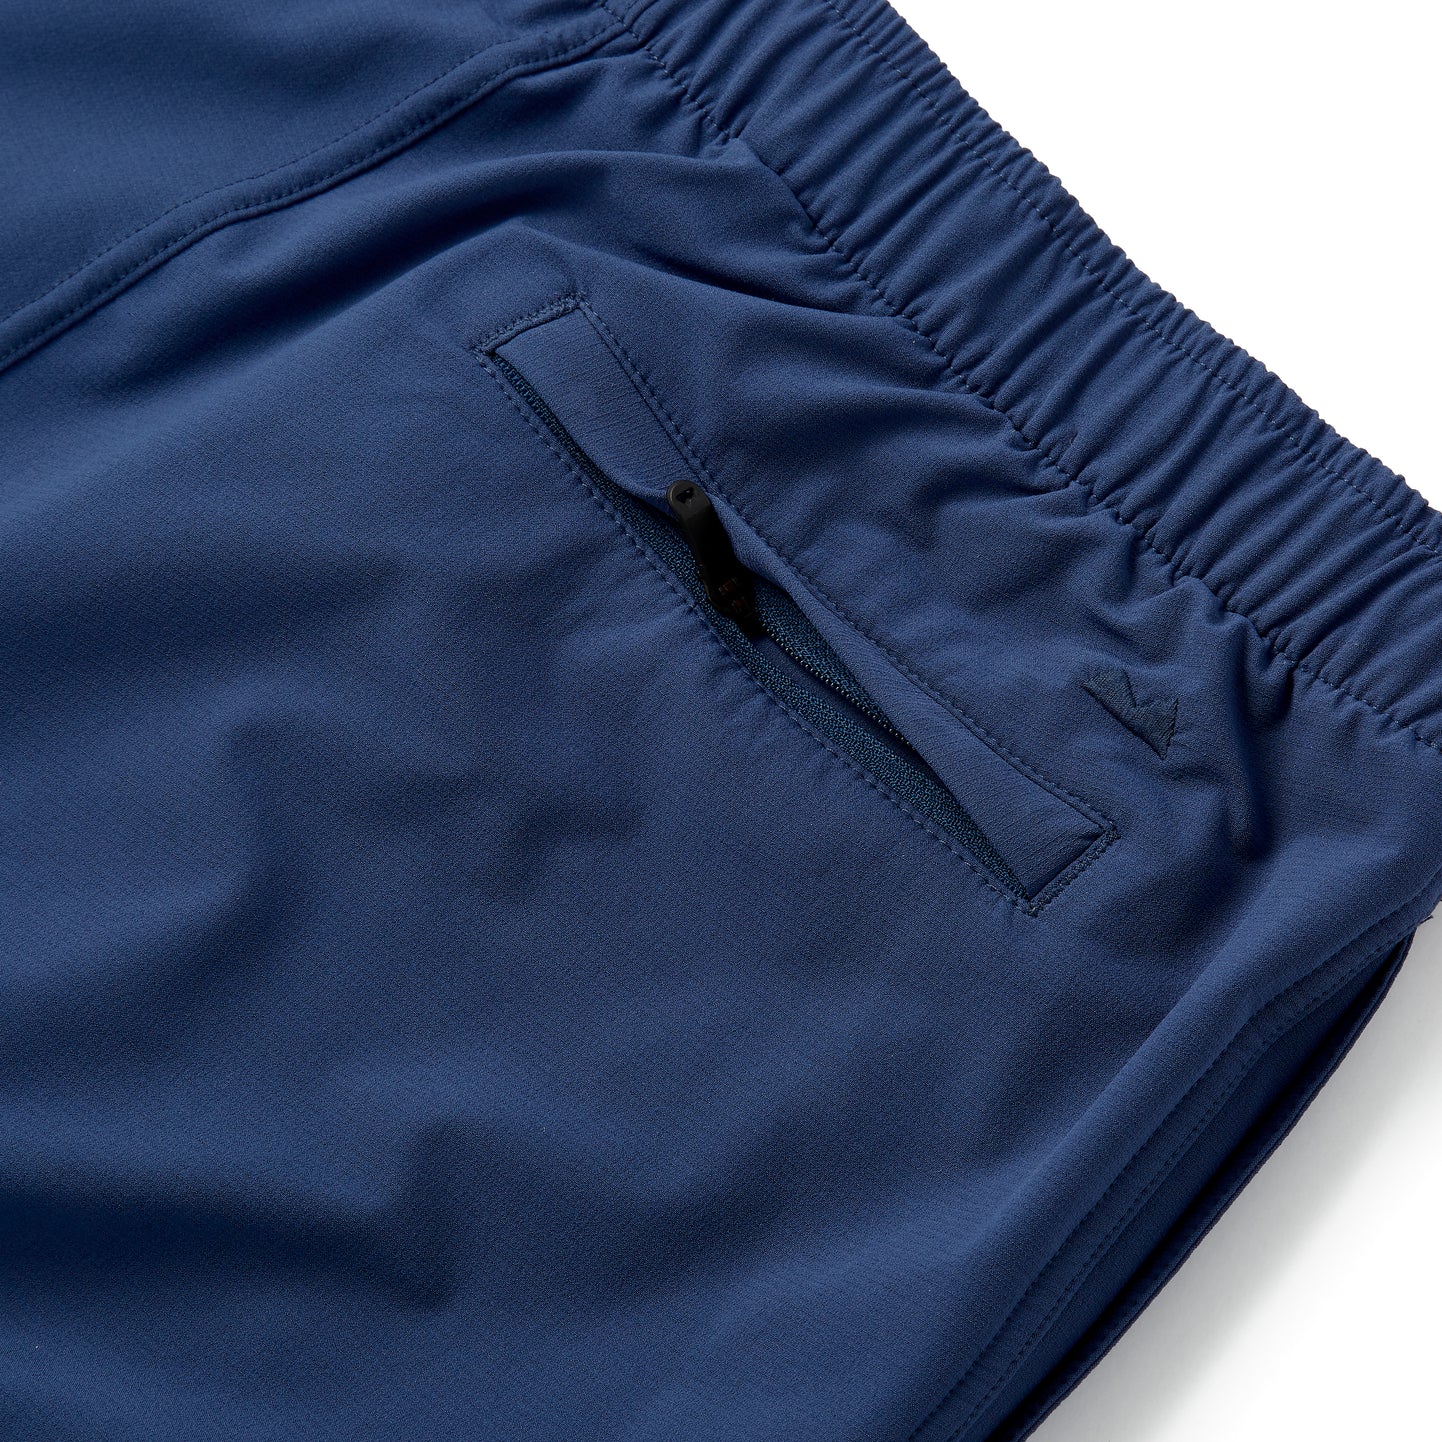 Everyday Pant in River Blue | Men's Athletic Pants | Myles Apparel ...